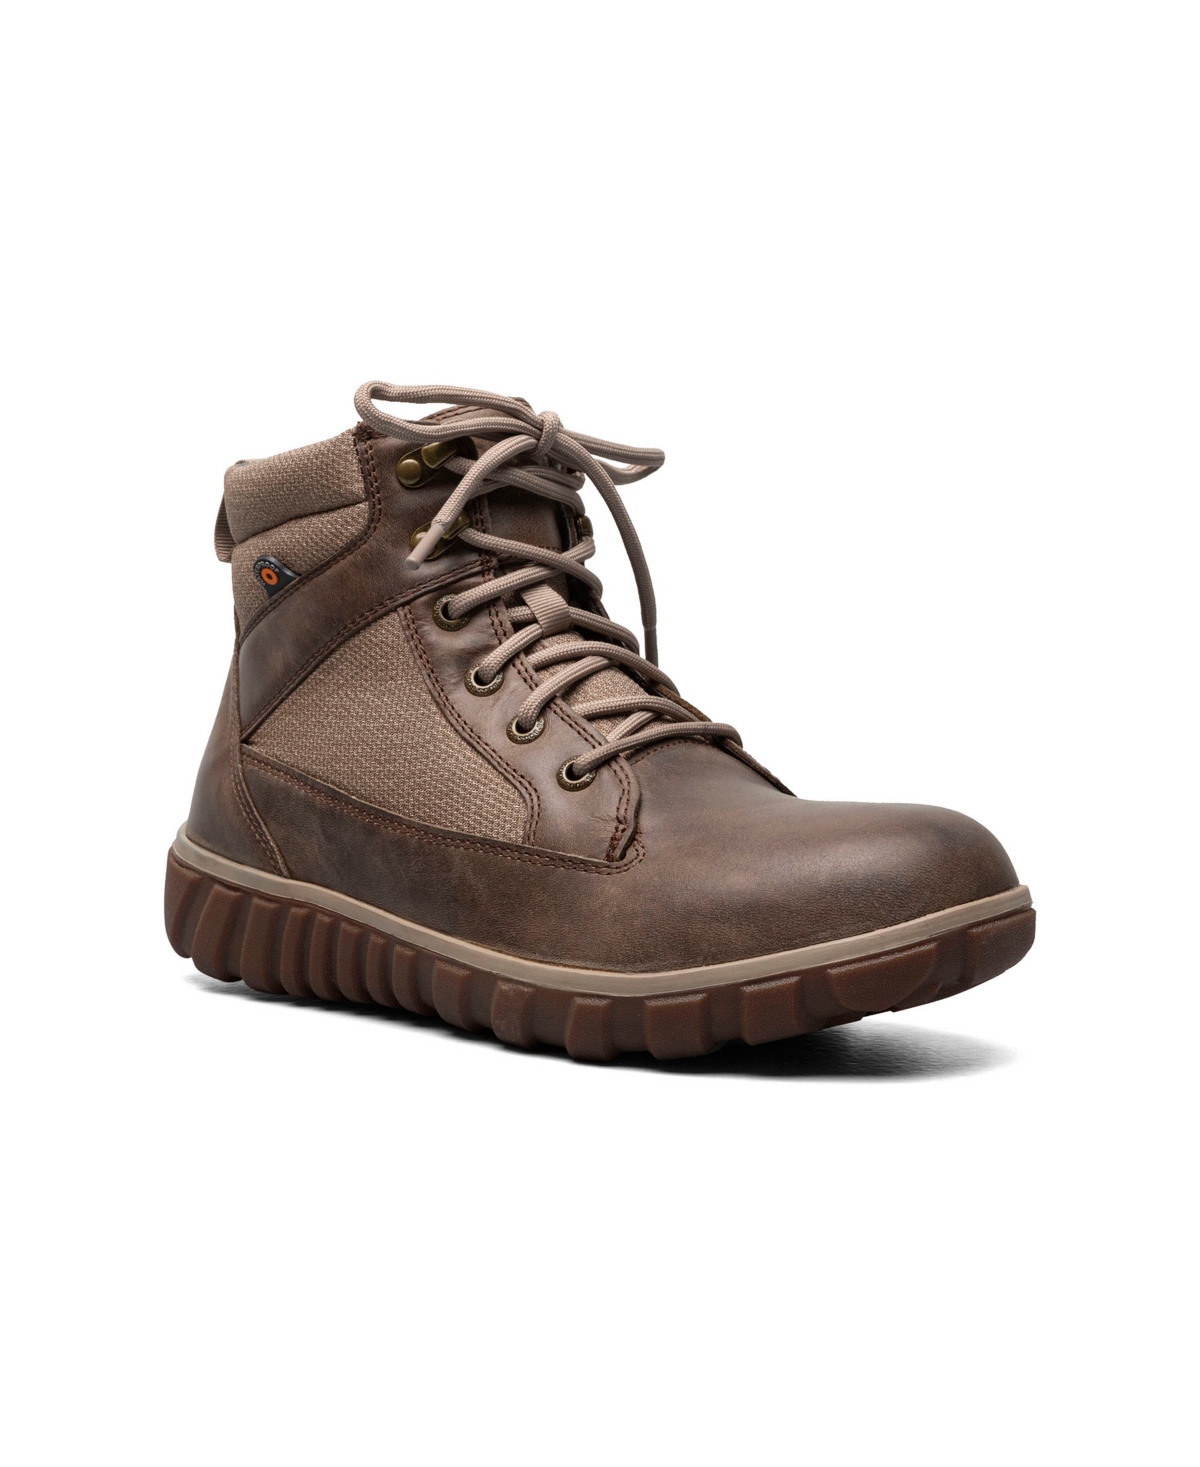 Men's Classic Casual Lace Up Boot - Taupe